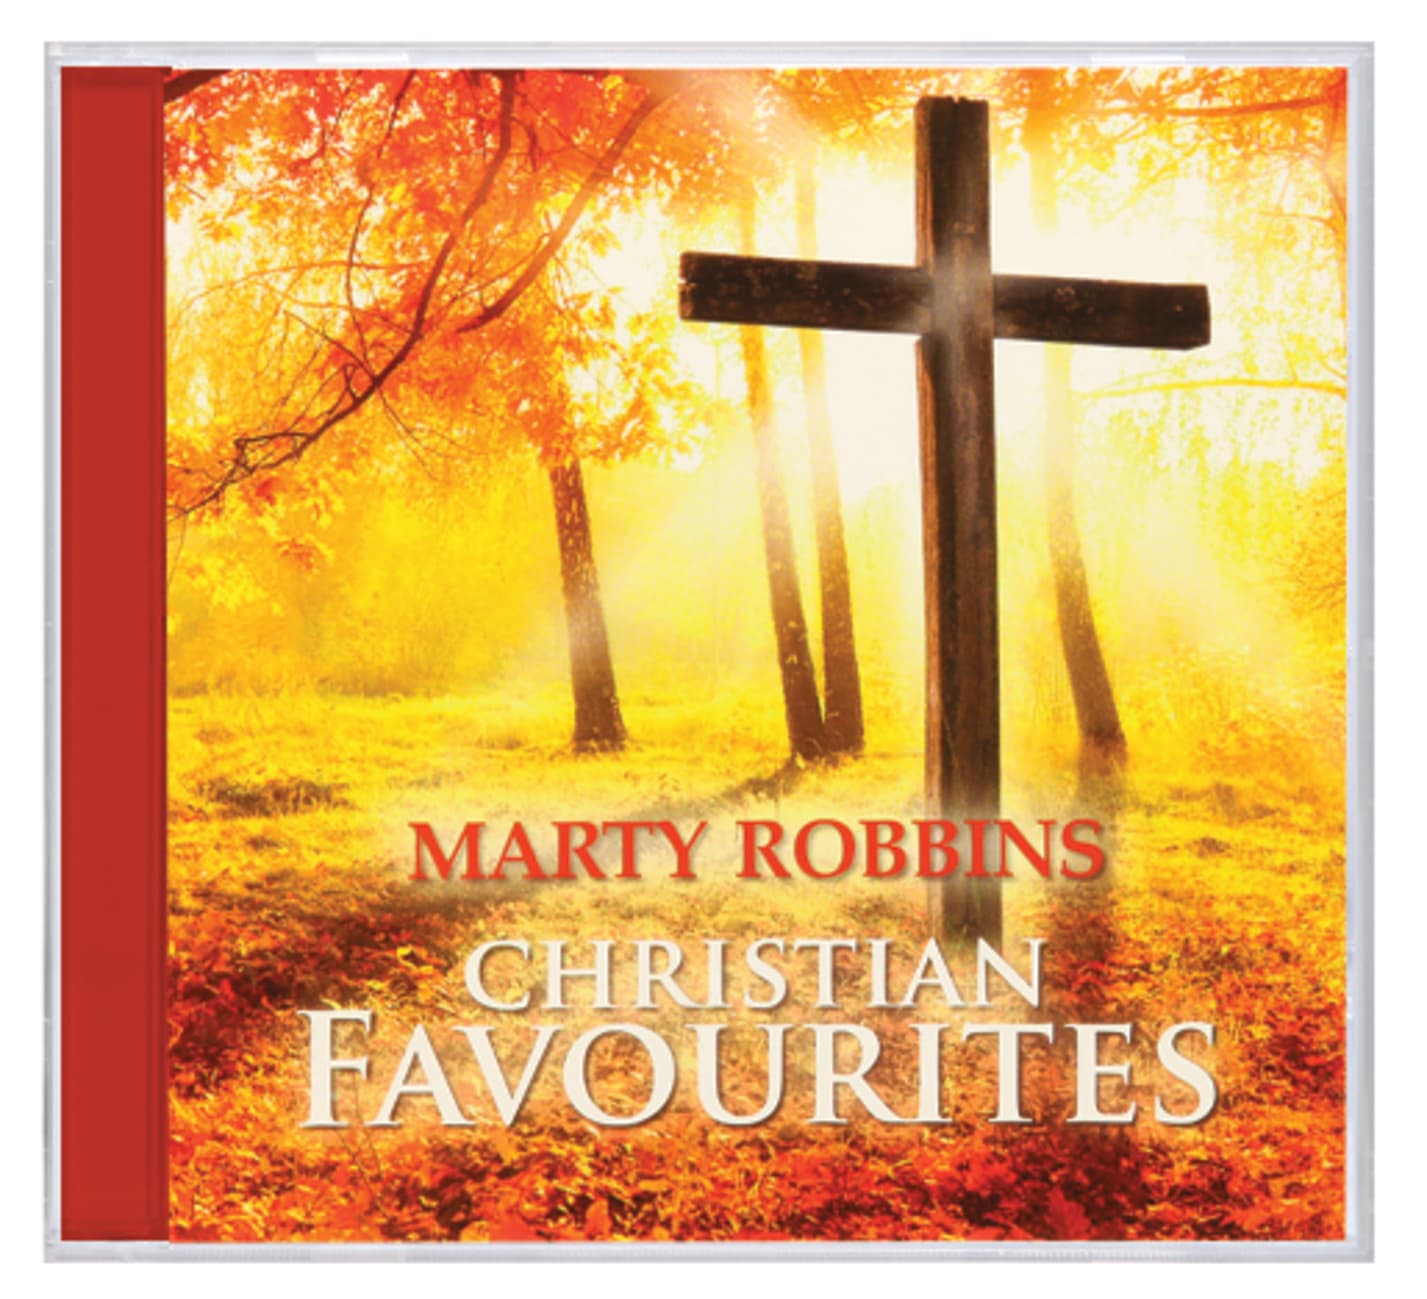 Marty Robbins: Christian Favourites Compact Disc